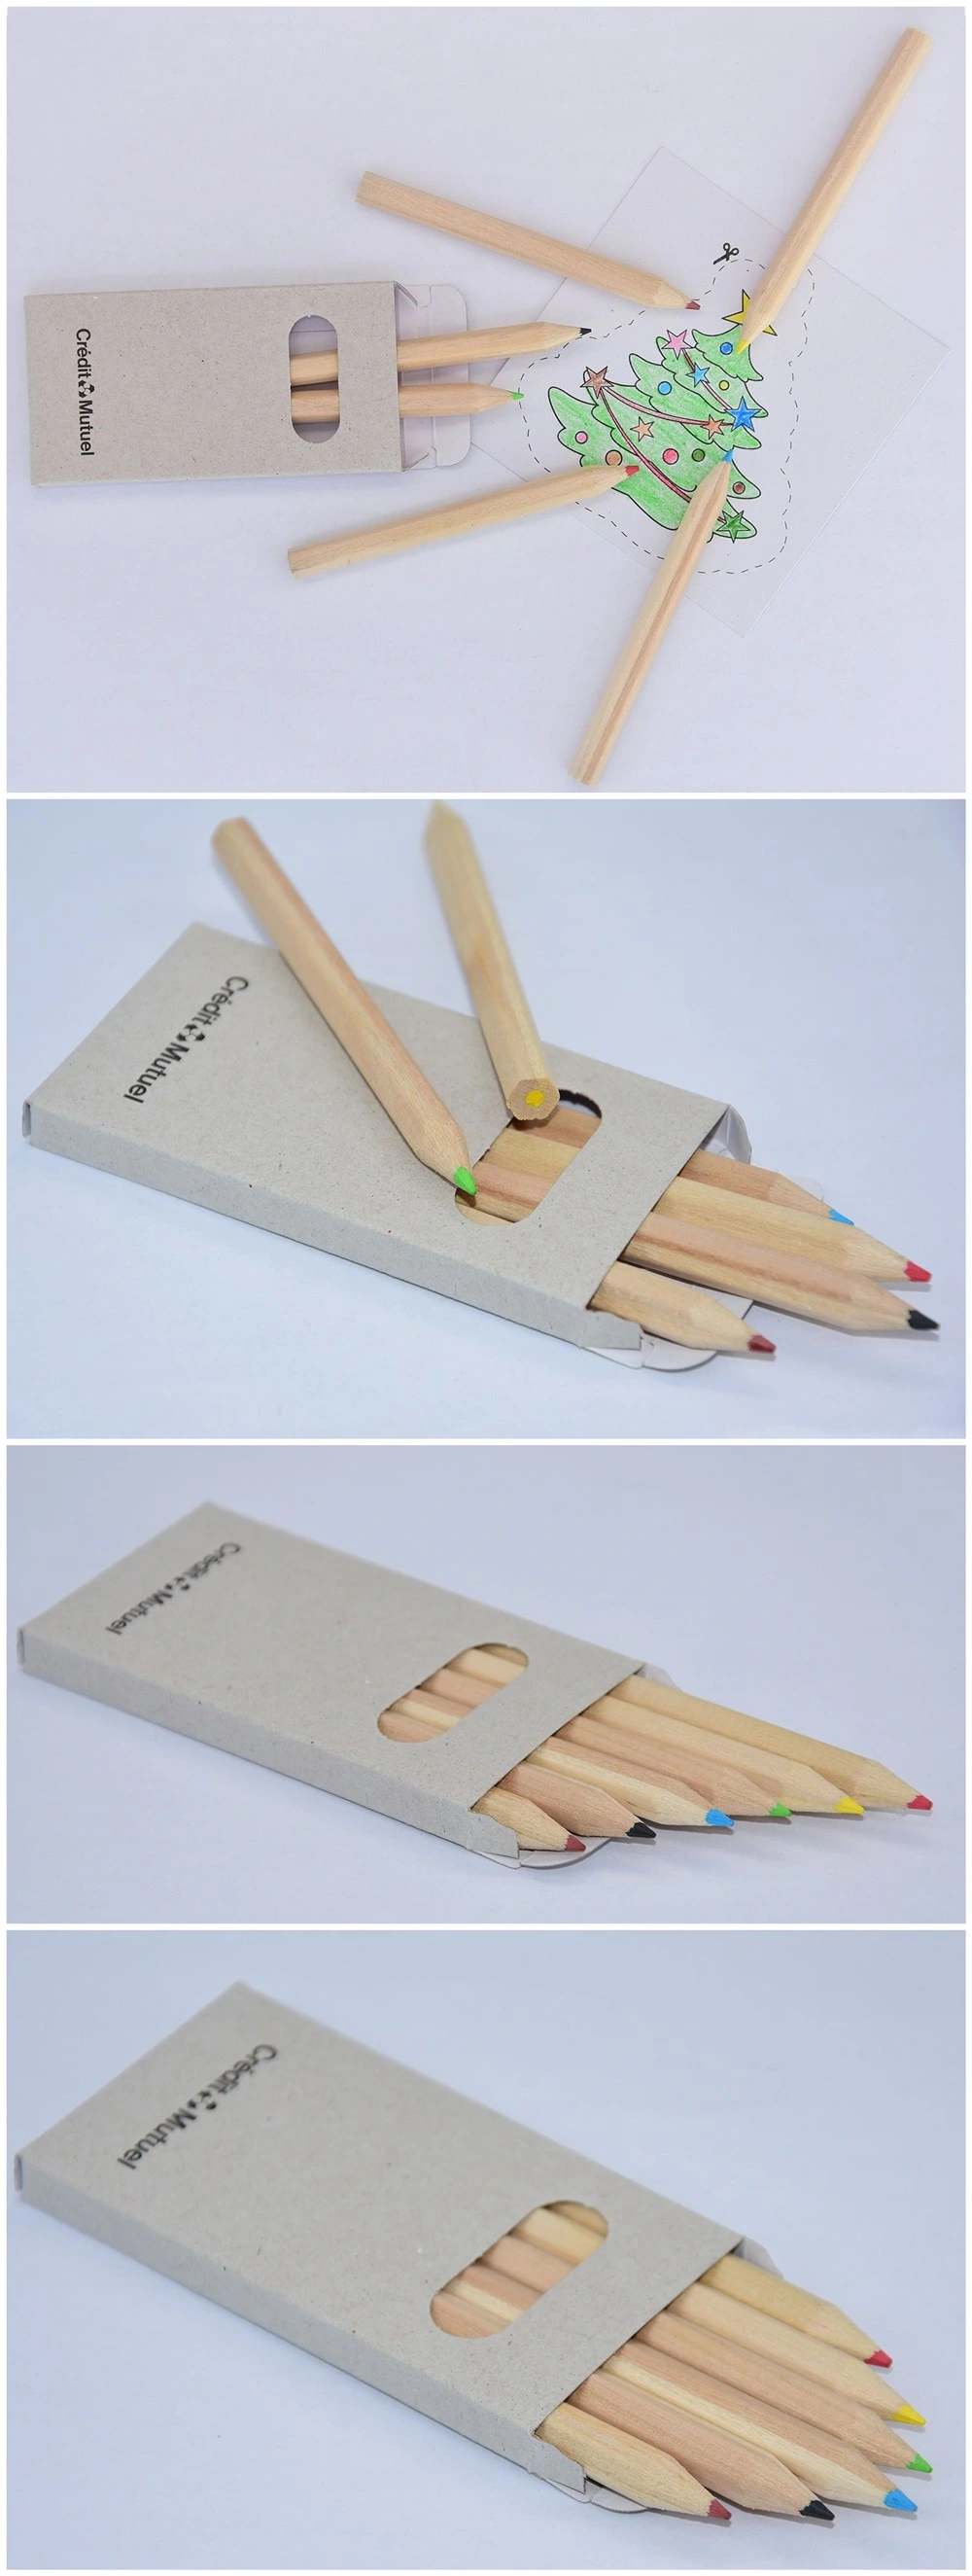 Gifts&Promotions Stationery Recycled Natural Wood 3.5 Inch 6 PCS Color Pencil in Grey Paper Box